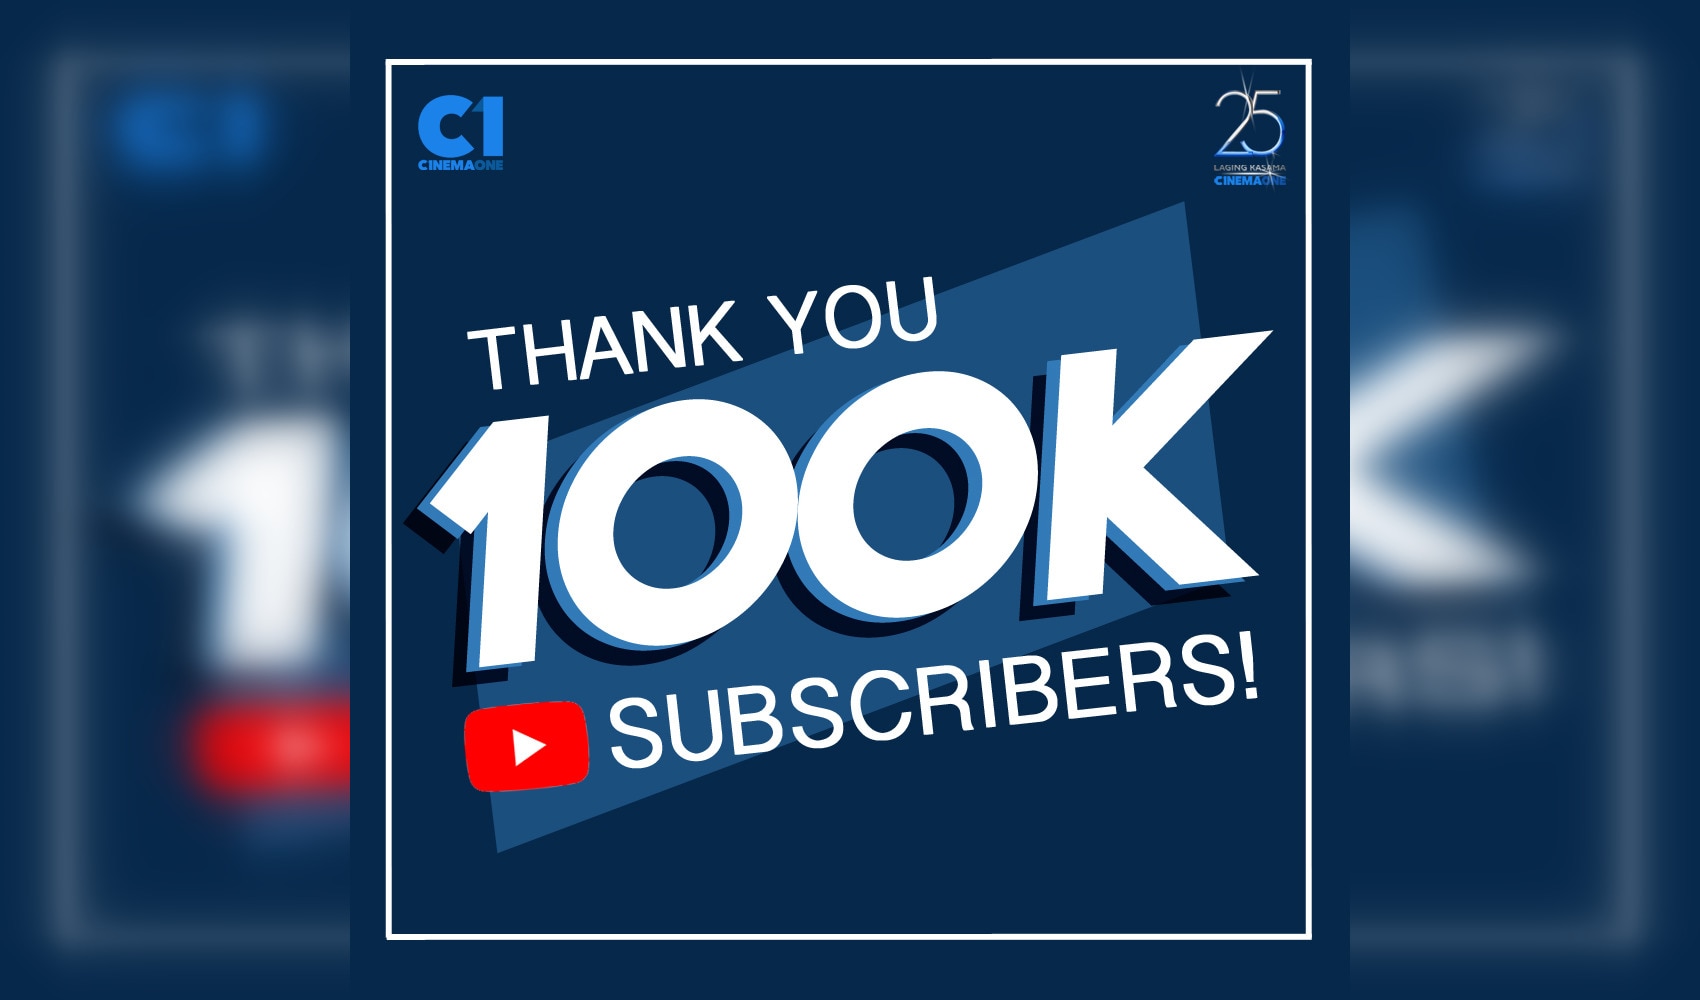 Cinema One's YouTube channel reaches 100K subscribers